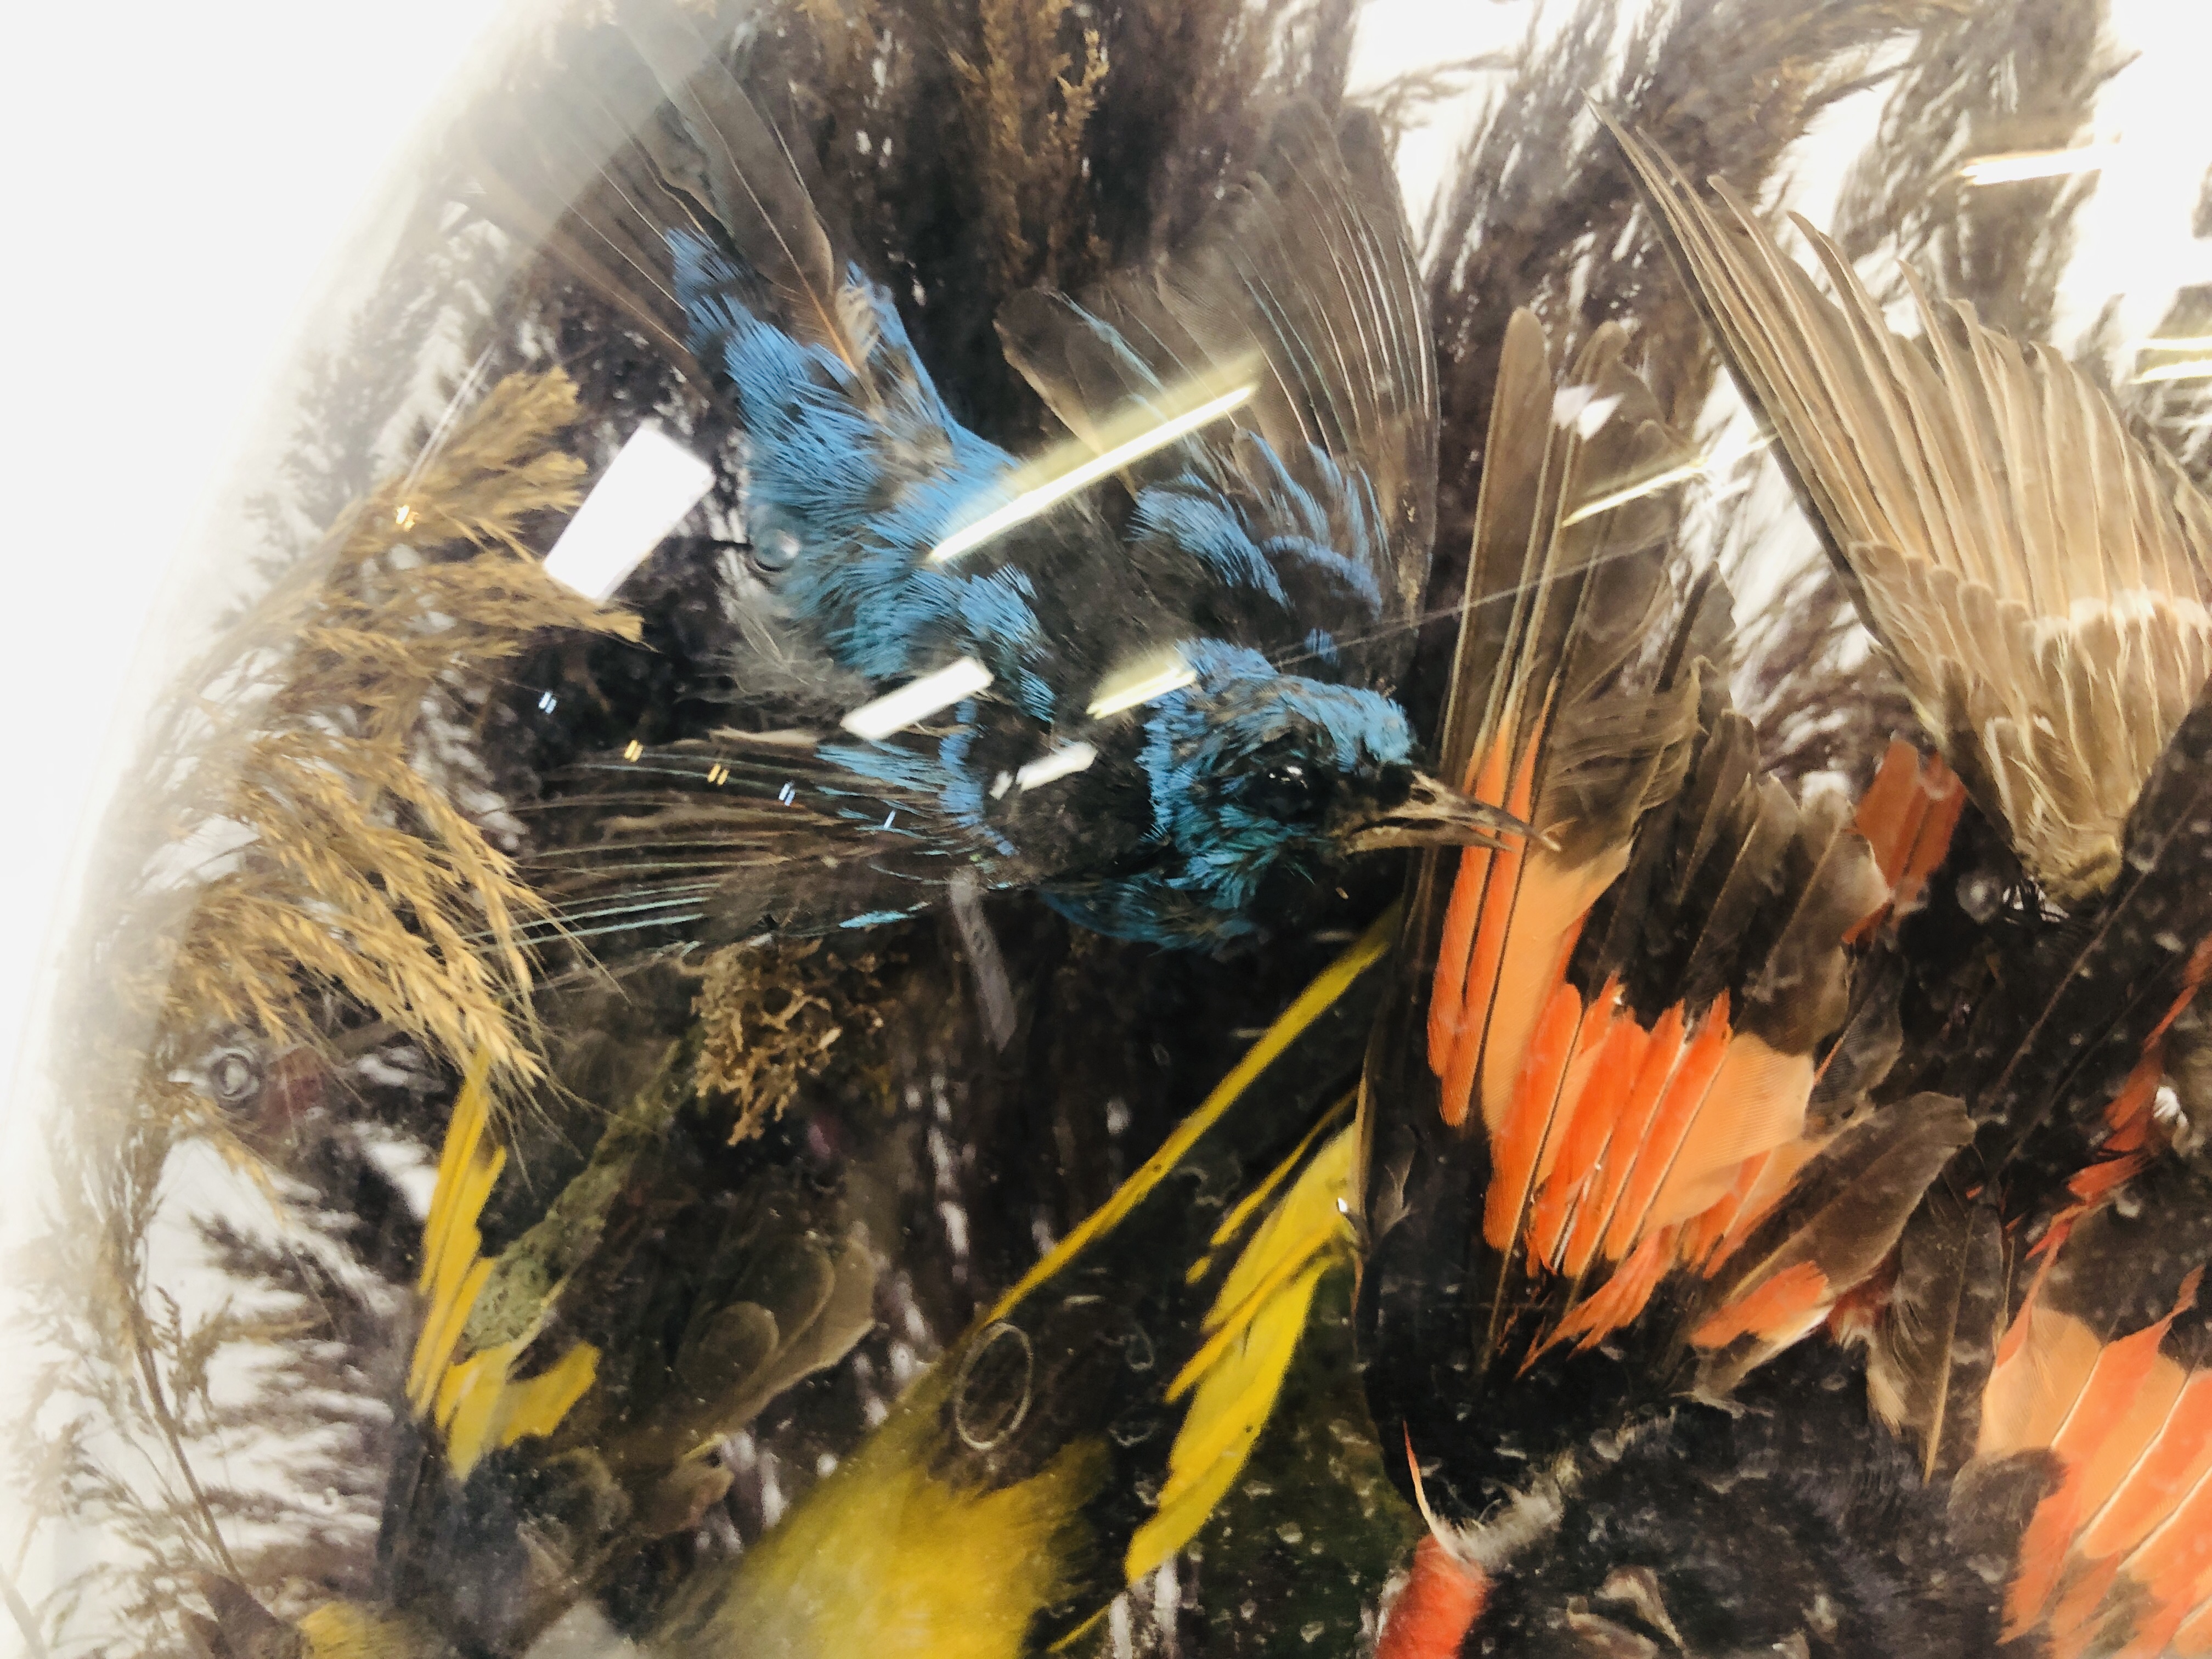 VICTORIAN TAXIDERMY DISPLAY OF EXOTIC BIRDS PRESENTED UNDER A GLASS DOME (8 BIRDS) H 50CM. - Image 3 of 11